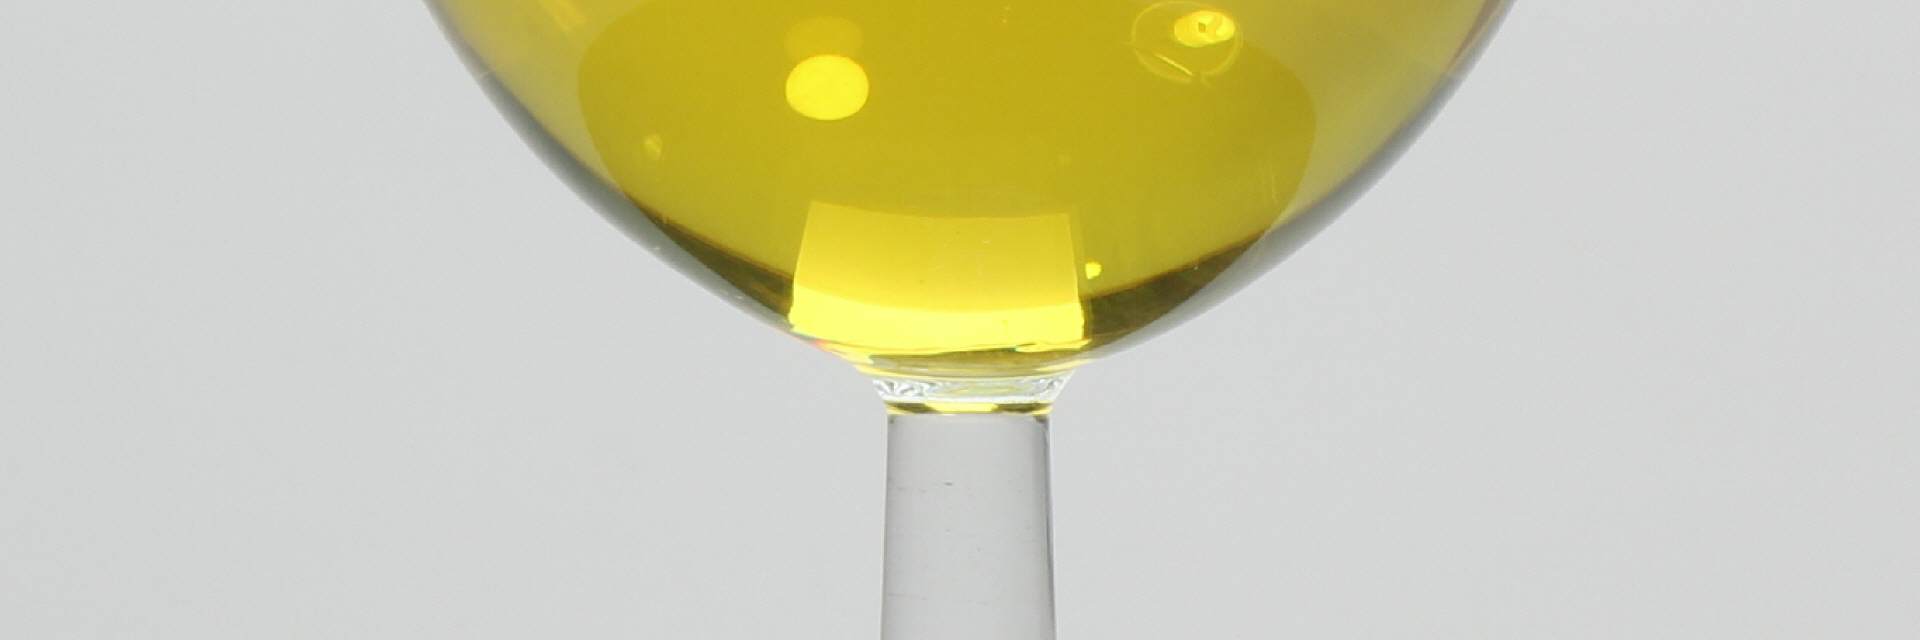 Yellow Golden Colloidal Silver 25ppm in a wine glas